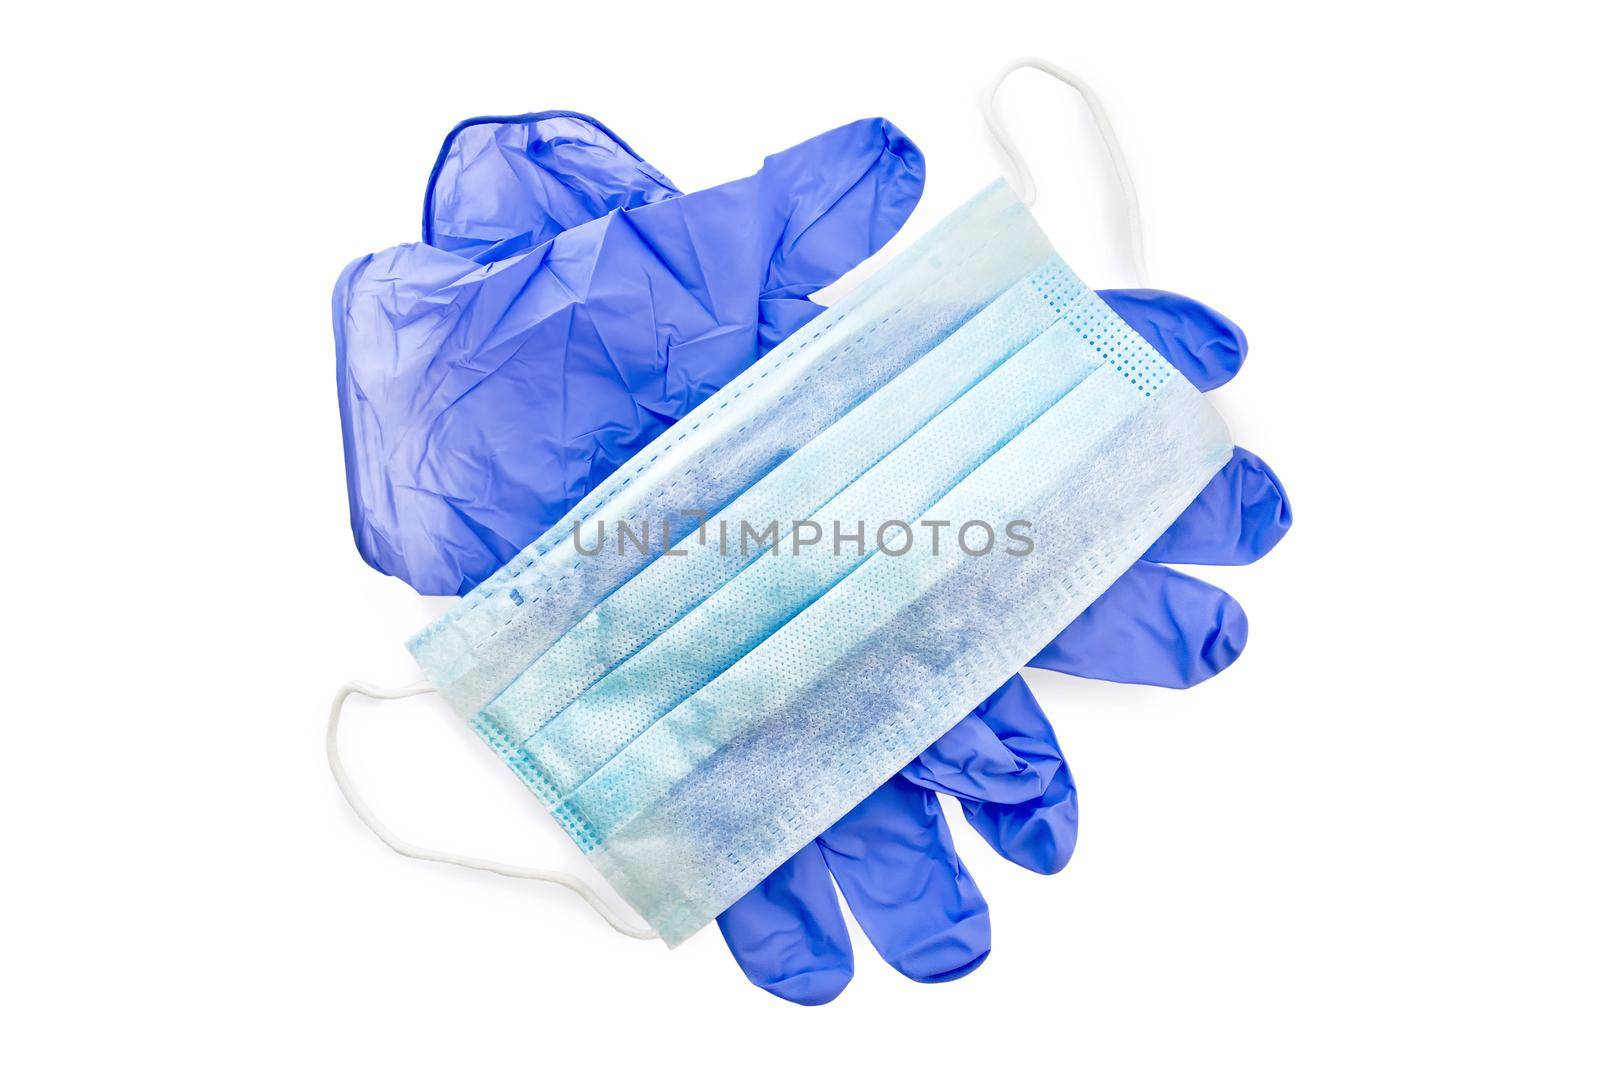 Blue latex gloves and medical disposable mask isolated on white background
